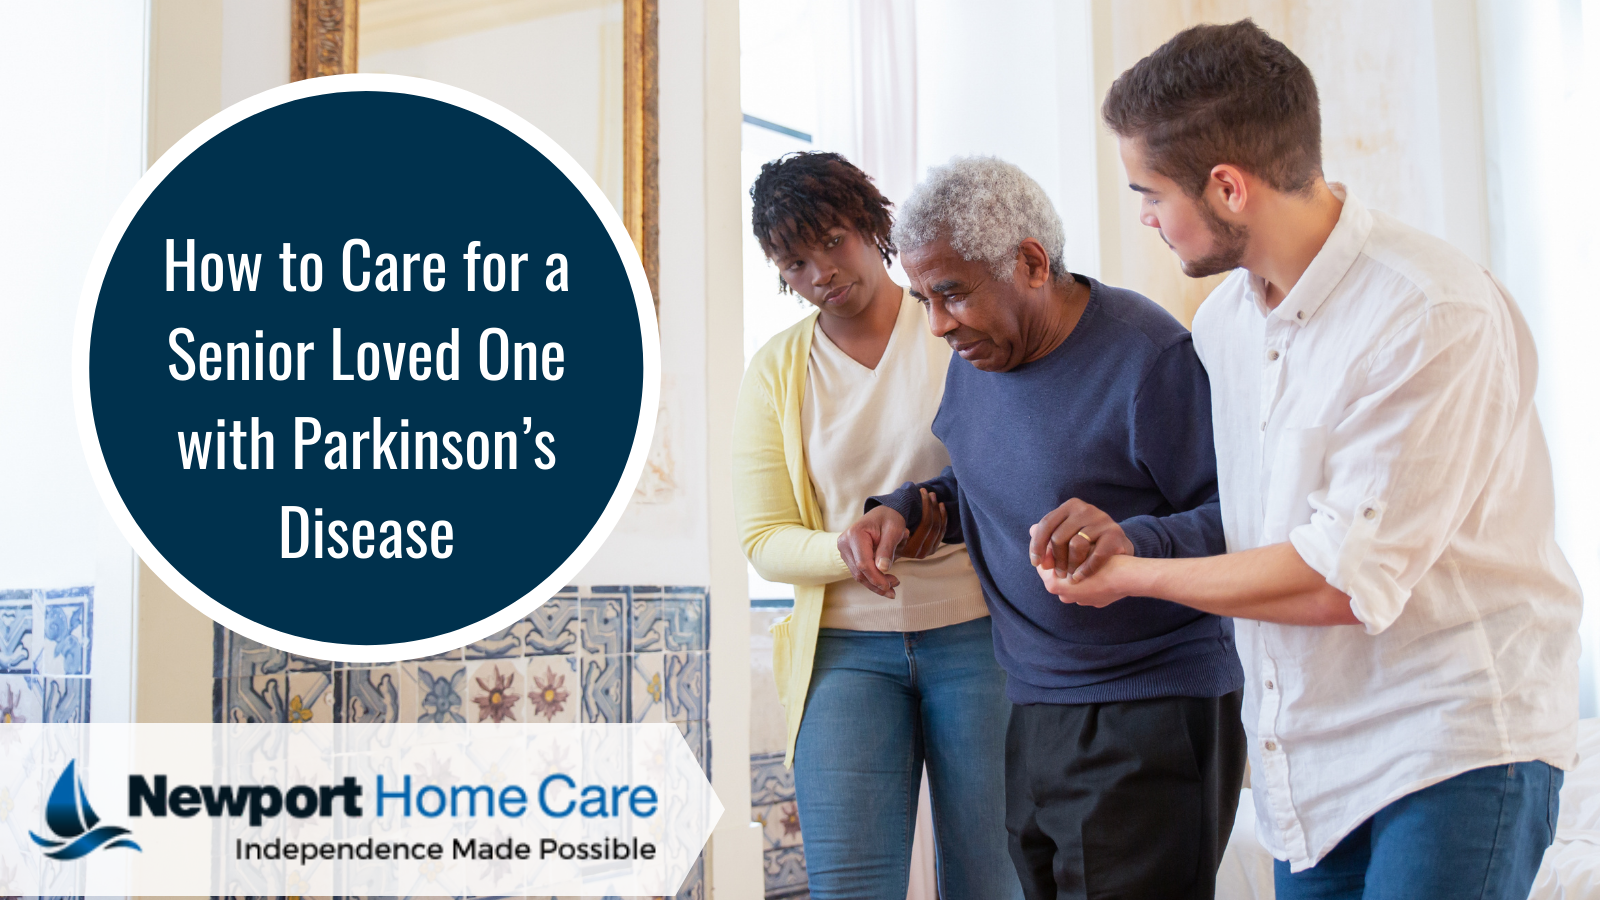 How to Care for a Senior Loved One with Parkinson’s Disease